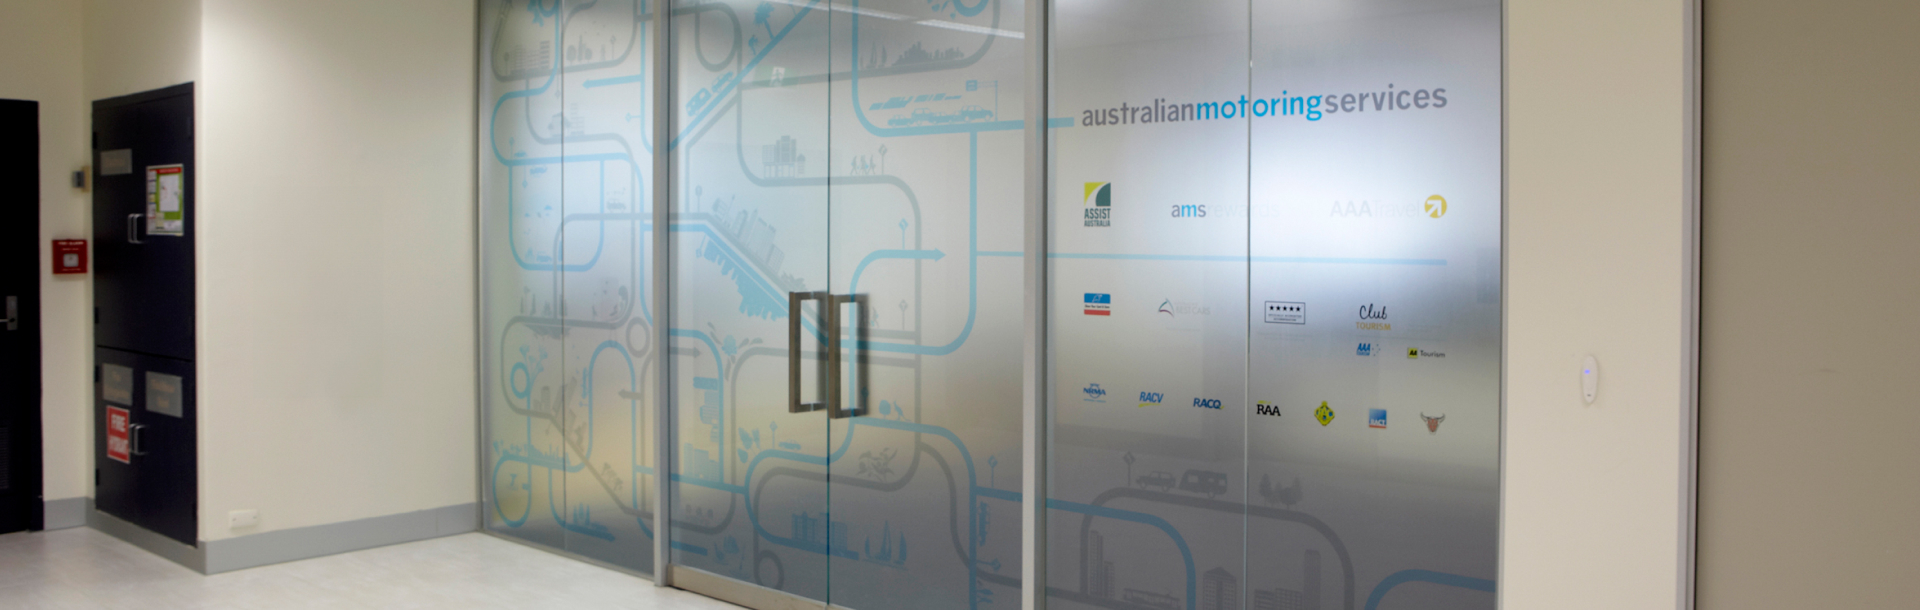 Entrance to Australian Motoring Services office with frosted glass and window decals designed by MOO Marketing & Graphic Design's branding studio in Melbourne